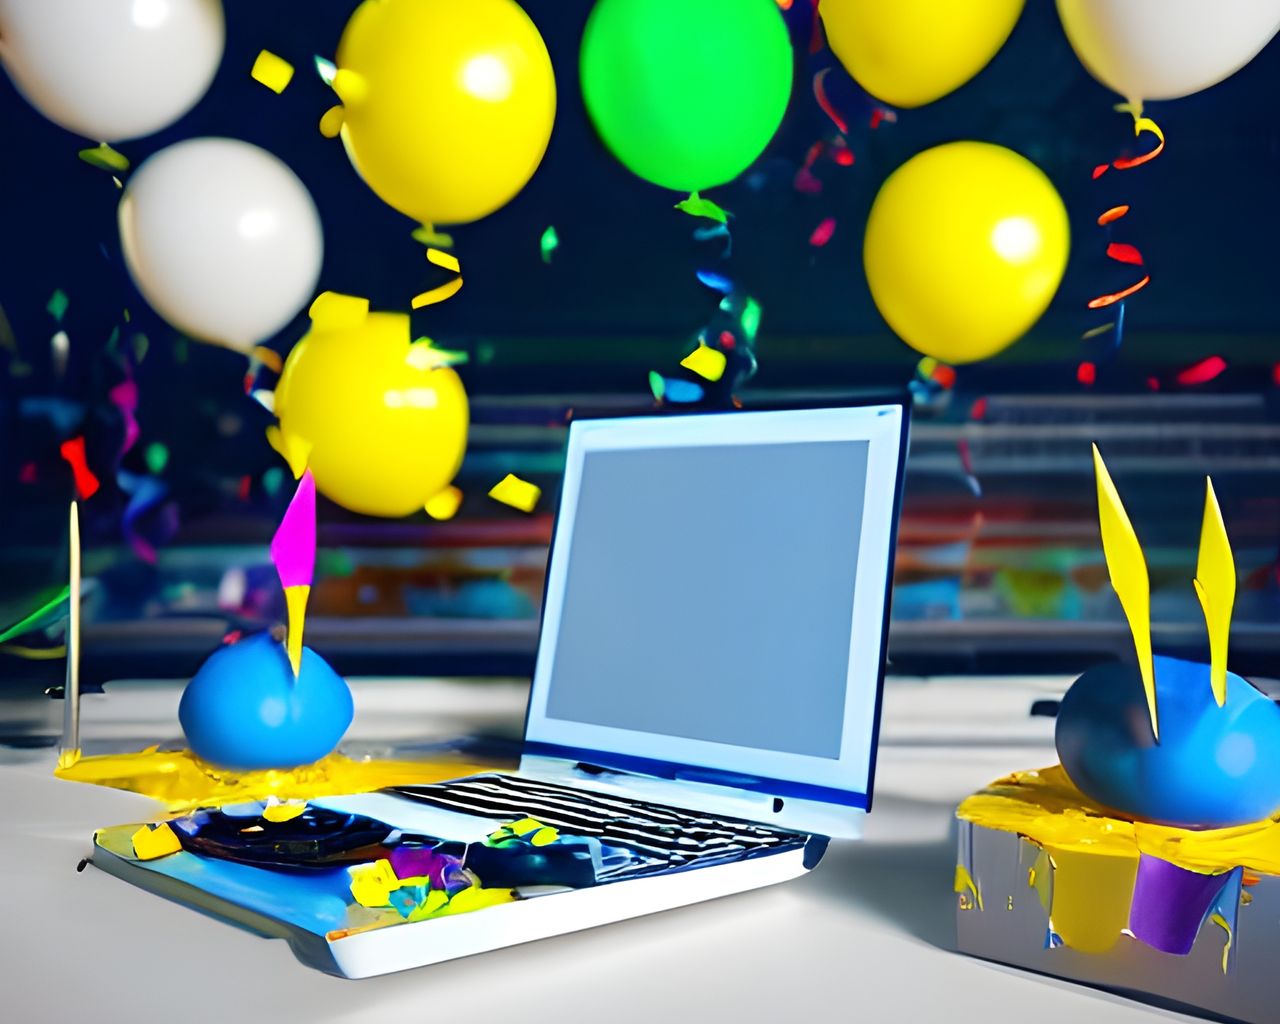 AI-generated image of balloons and a computer